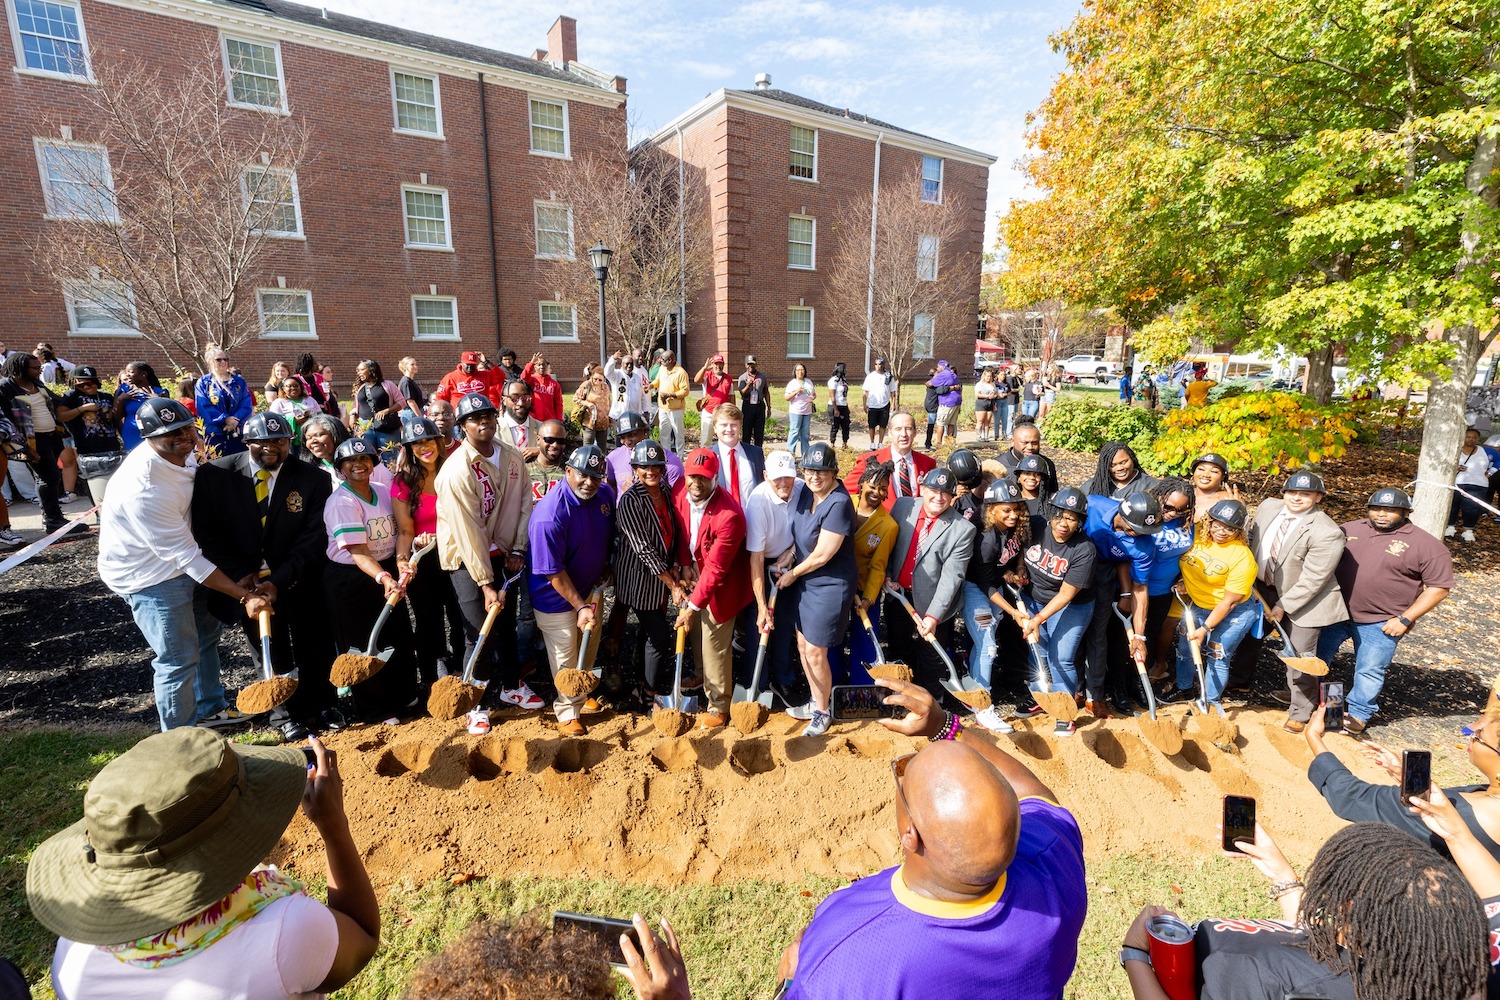 APSU hosts the NPHC Plaza Groundbreaking Ceremony during Homecoming celebrations on Oct. 28